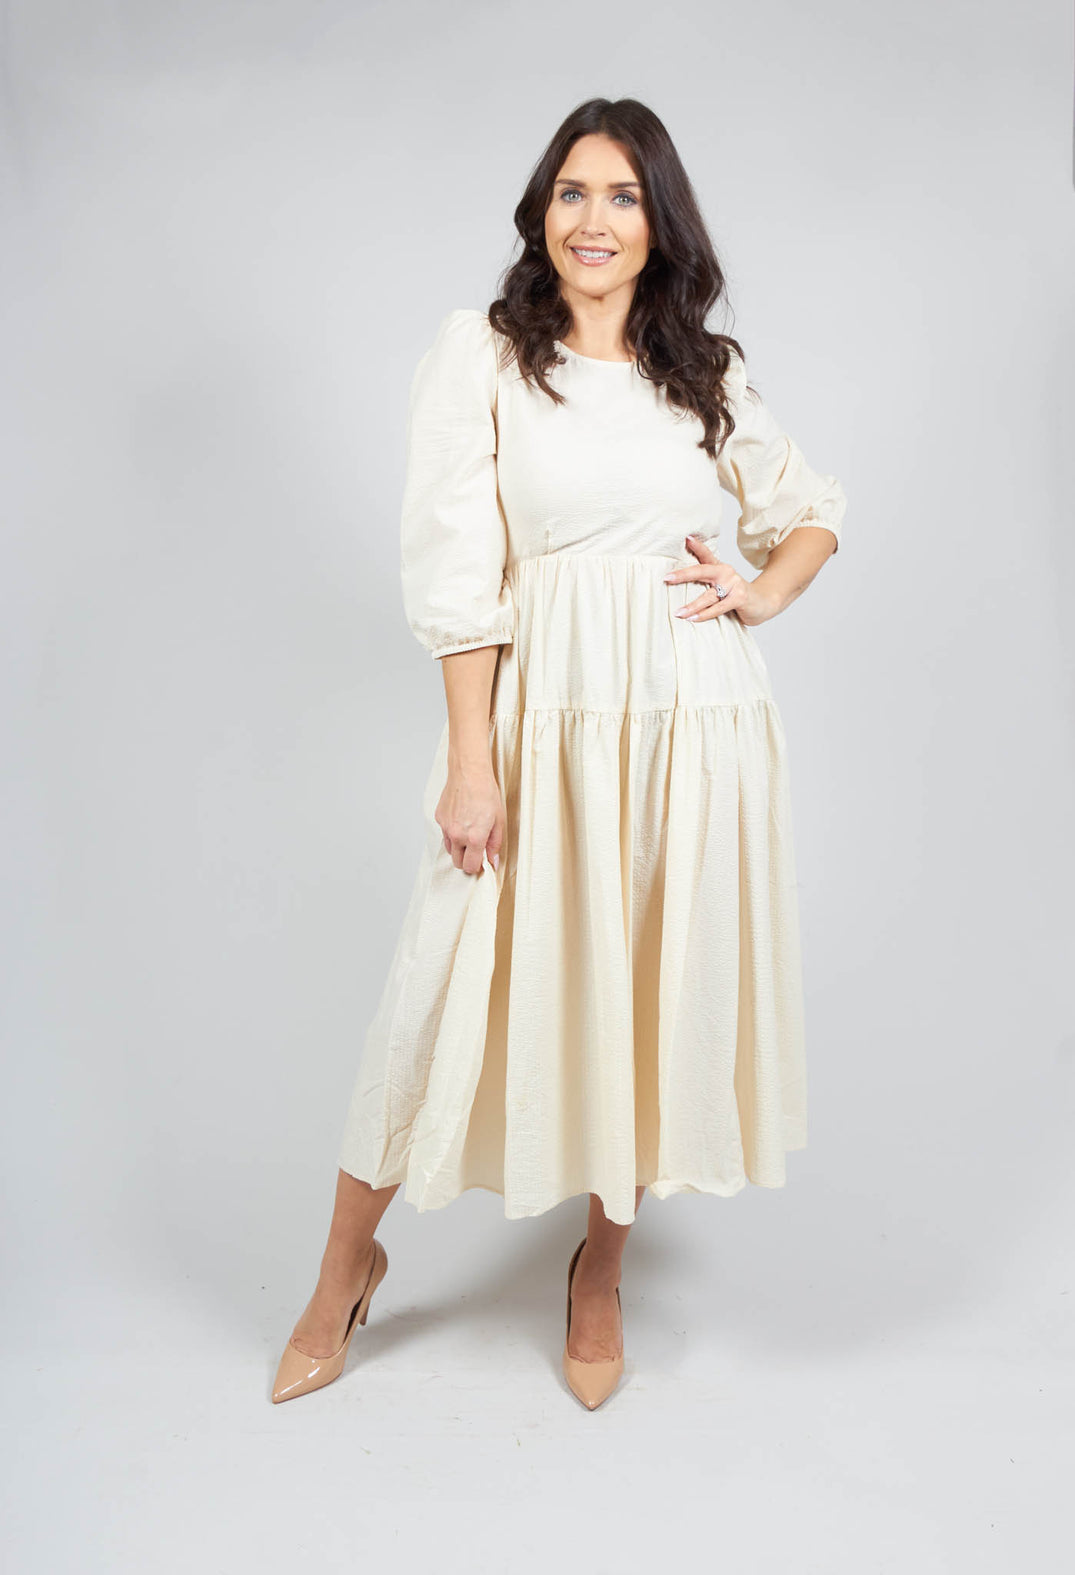 beatrice b cream shift dress with mid length sleeves and tie bow detailing